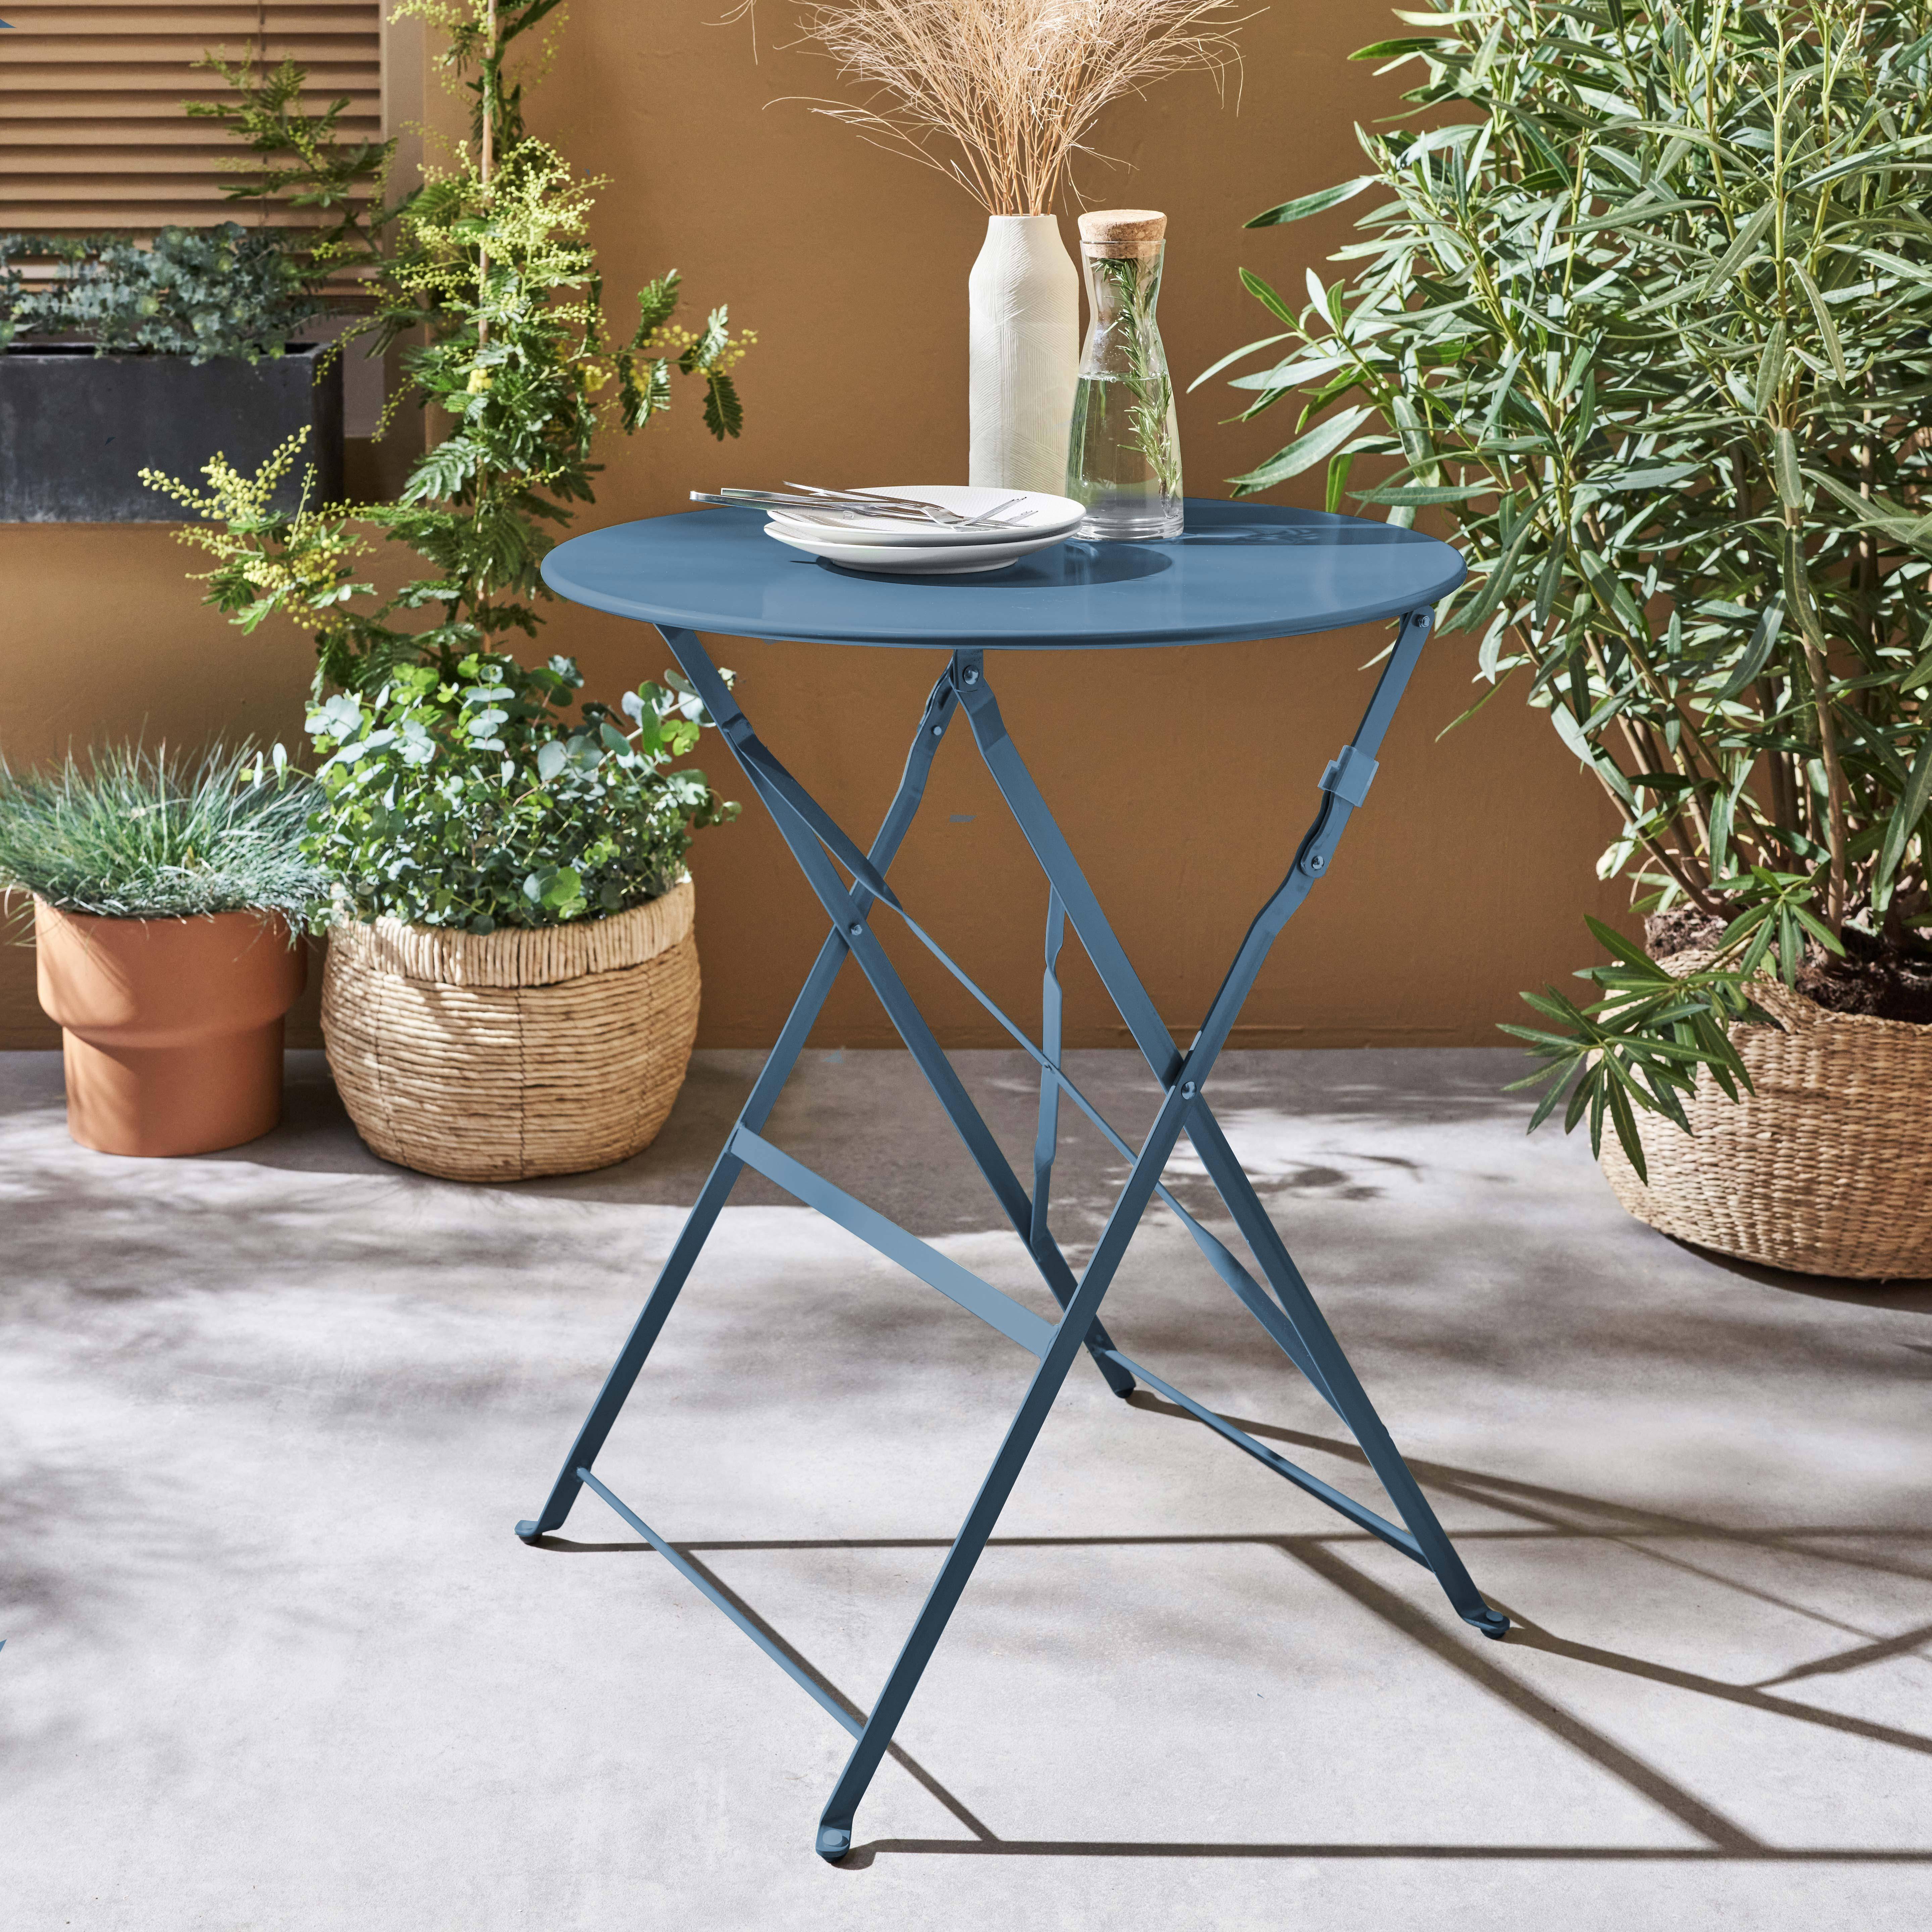 Foldable bistro garden table - Round Emilia grey blue - Round table Ø60cm, thermo-lacquered steel,sweeek,Photo1